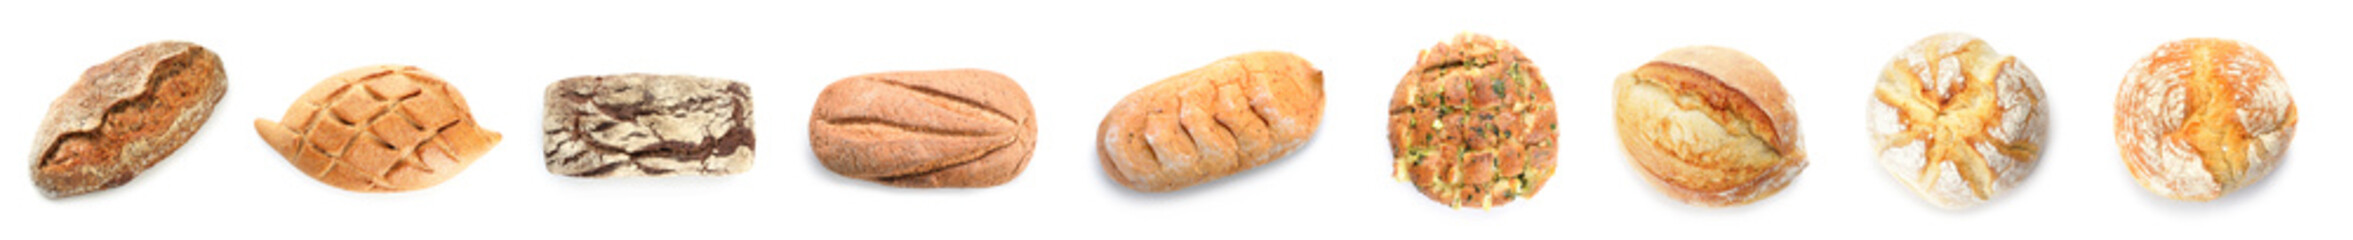 Collage of fresh loaves of bread on white background